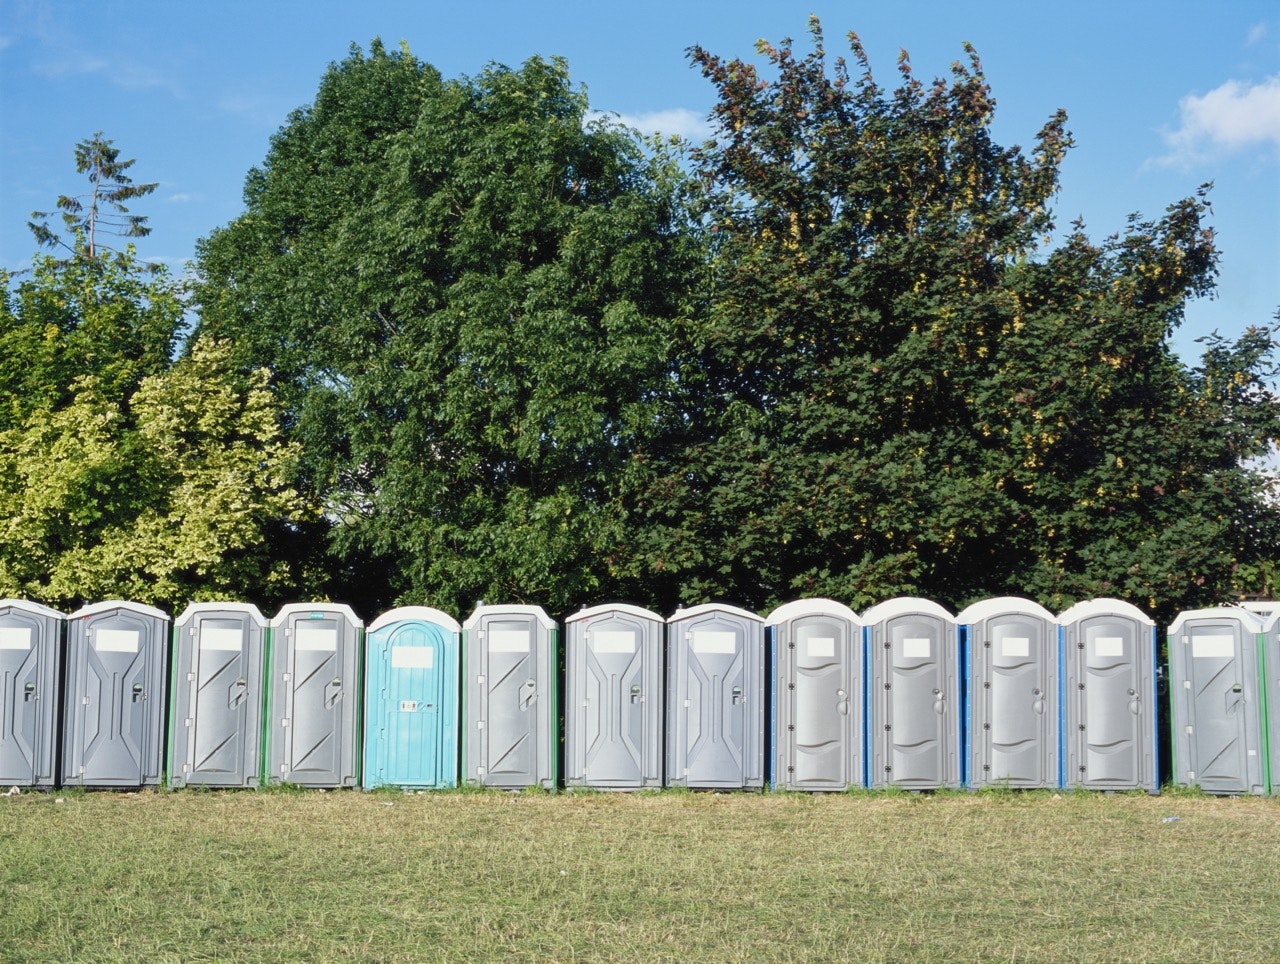 Portable toilet cubicles lined up at edge of trees